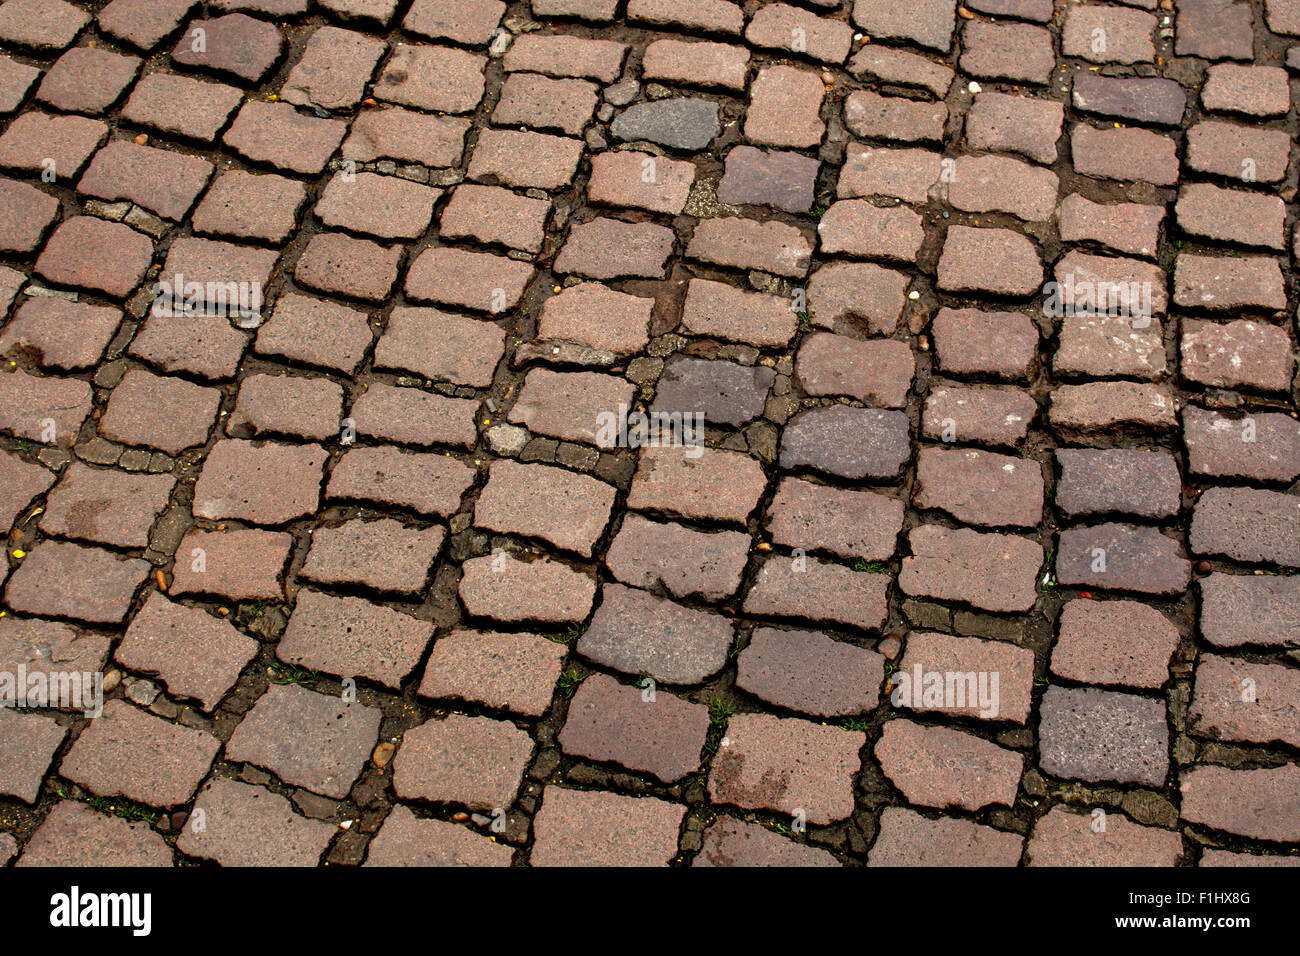 Cobbled road surface, UK Stock Photo